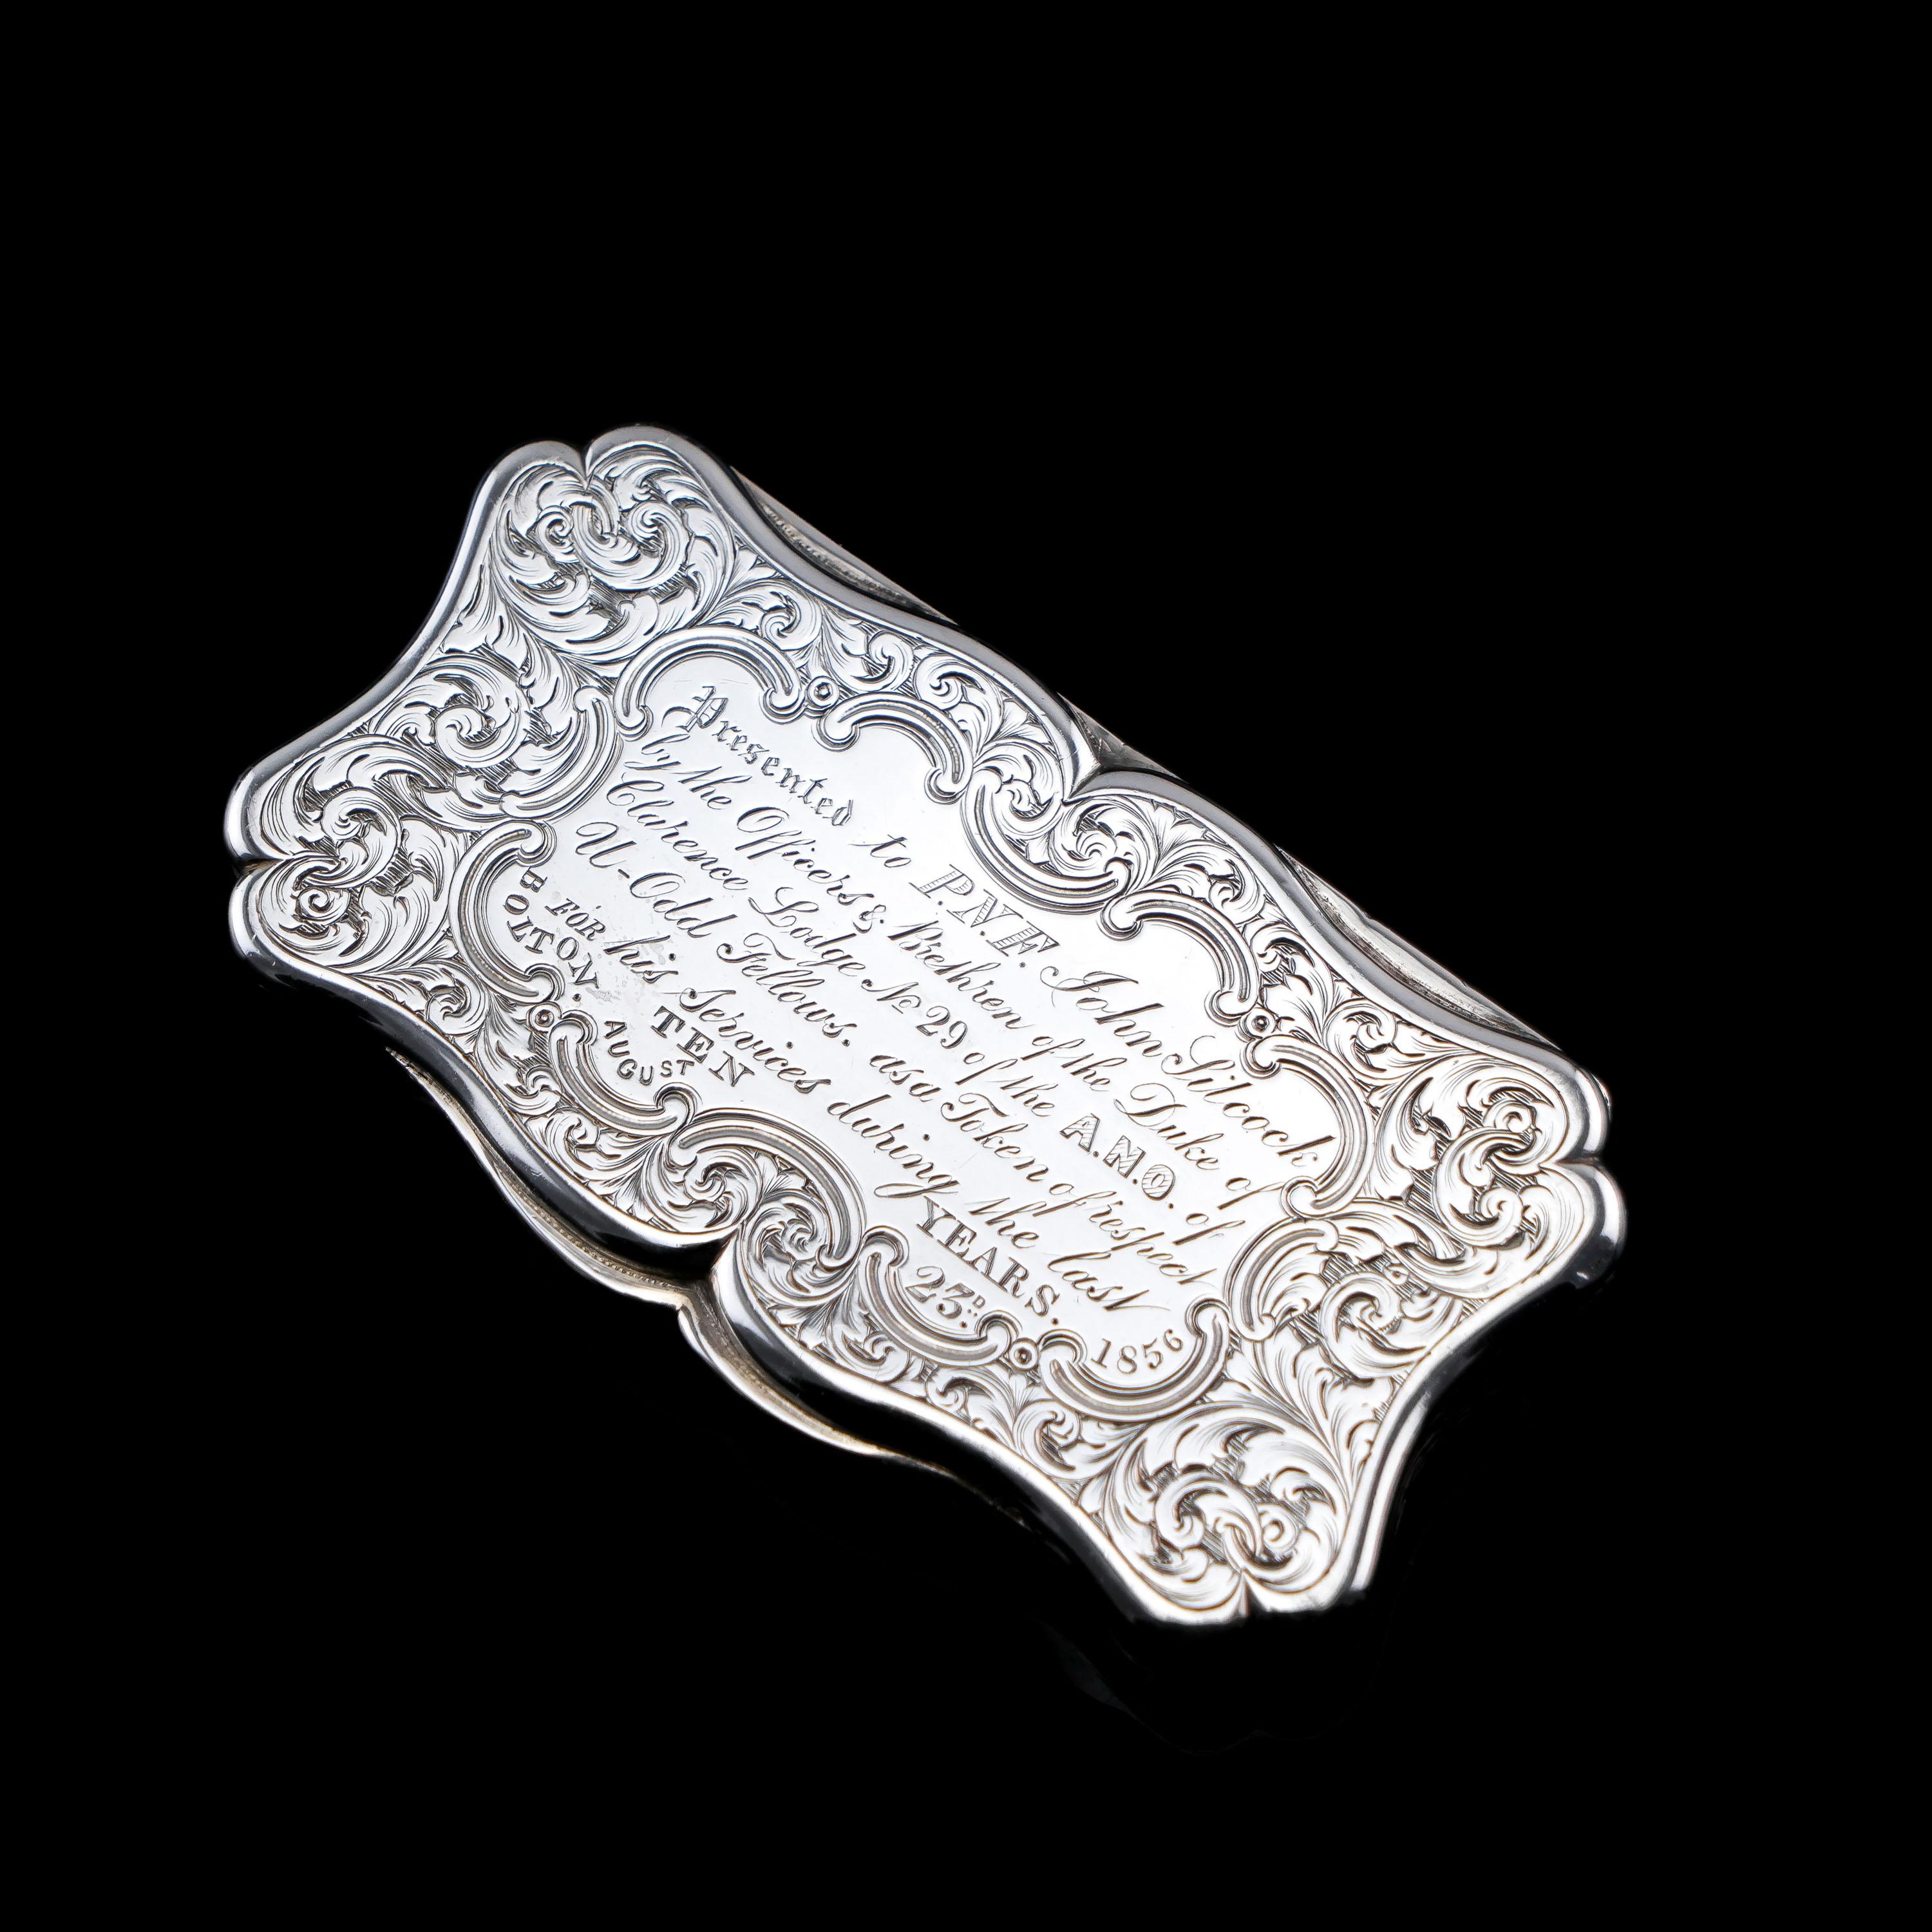 We are delighted to offer this beautiful hand-engraved solid silver snuff box made in Birmingham in 1850 with the maker's mark of Edward Smith.
  
This snuff box is an exemplary piece of intricate Victorian silverware displaying the most desirable